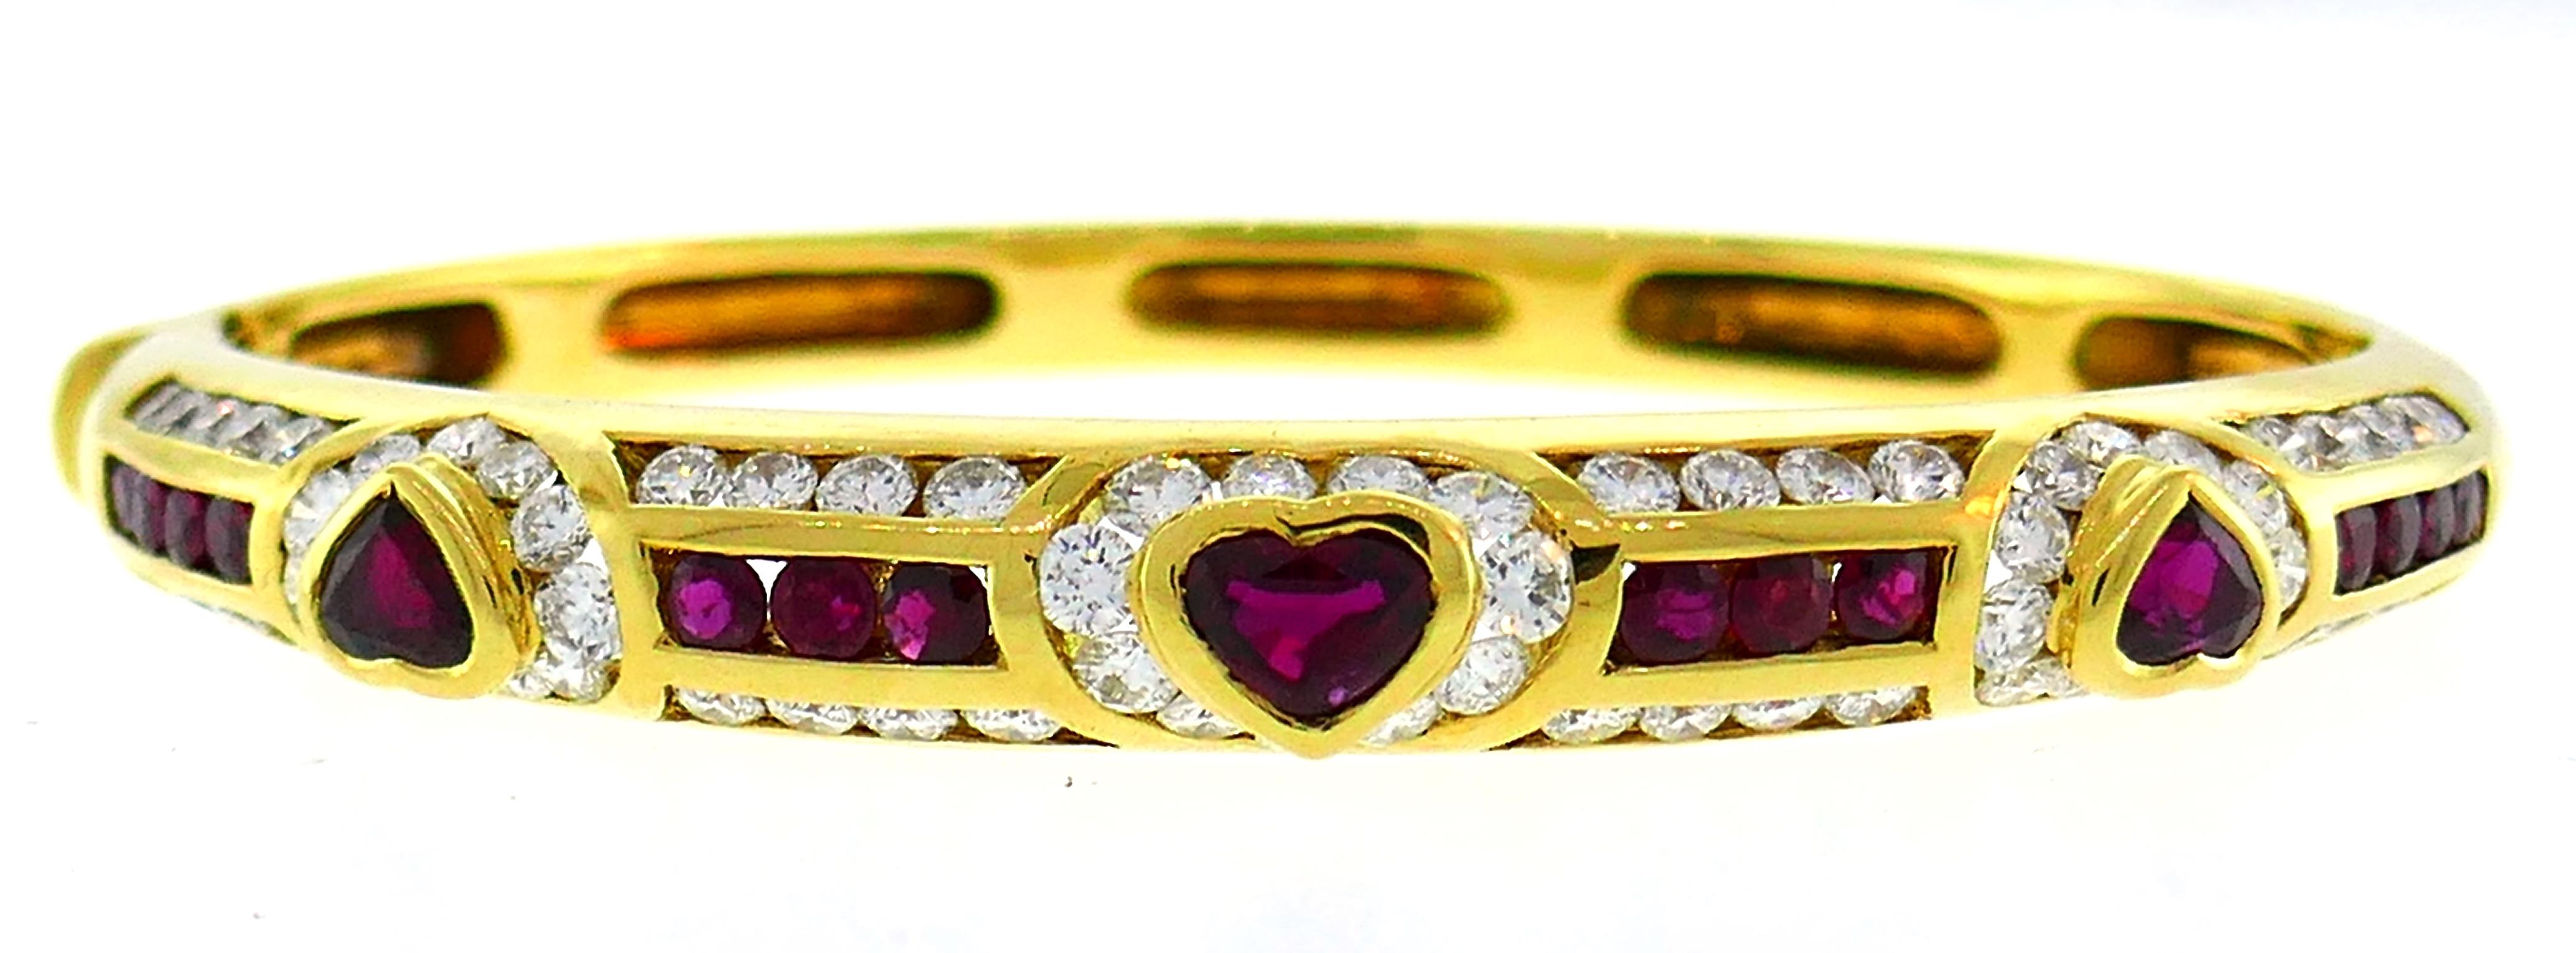 Round Cut Fred Paris Heart Ruby Yellow Gold Bangle Bracelet with Diamond Accents, 1970s